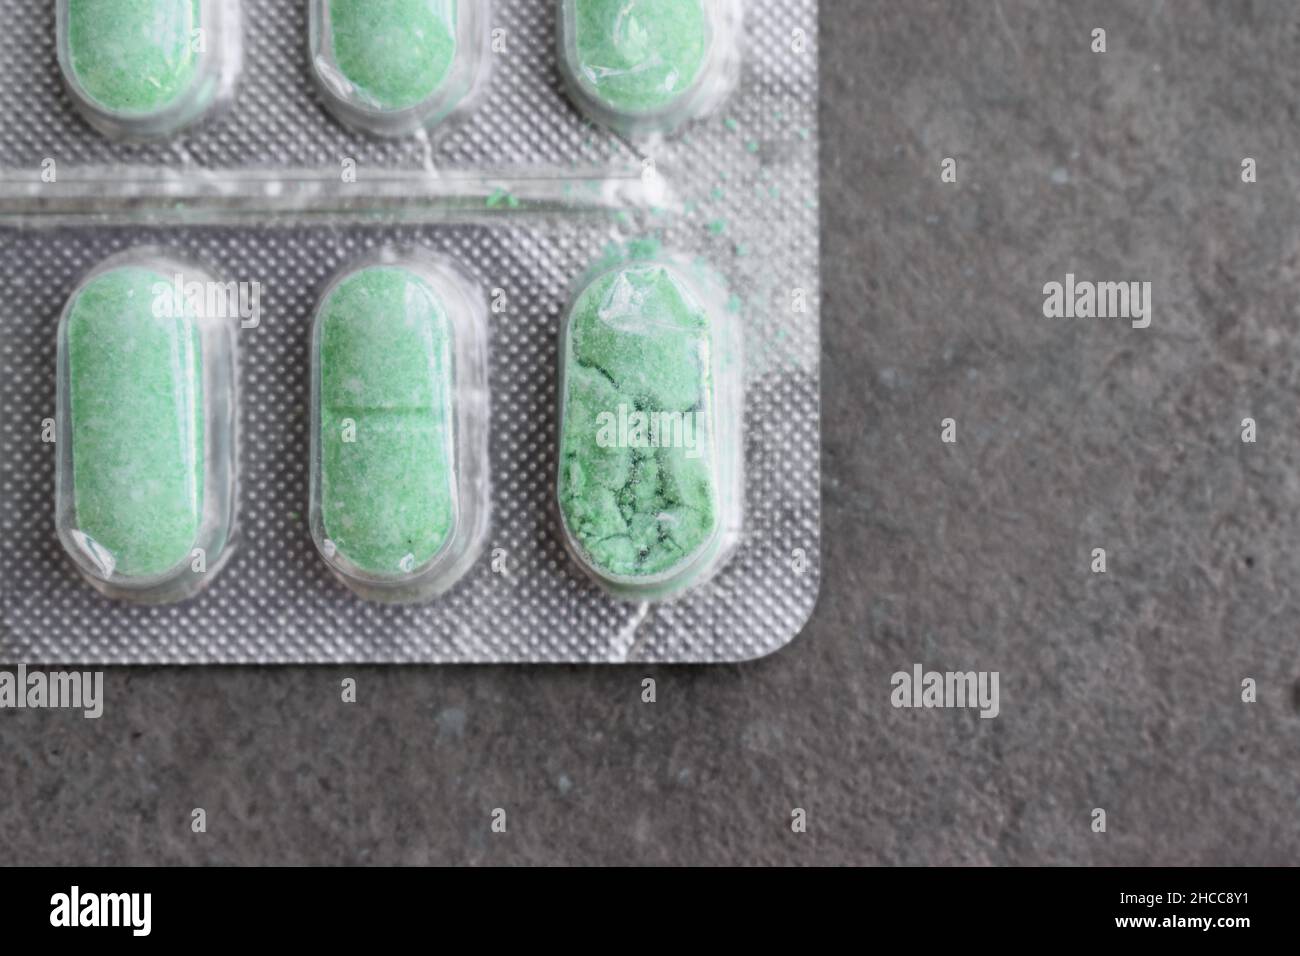 Crushed and damaged tablets in closeup view.  Concept of expired drugs. Stock Photo